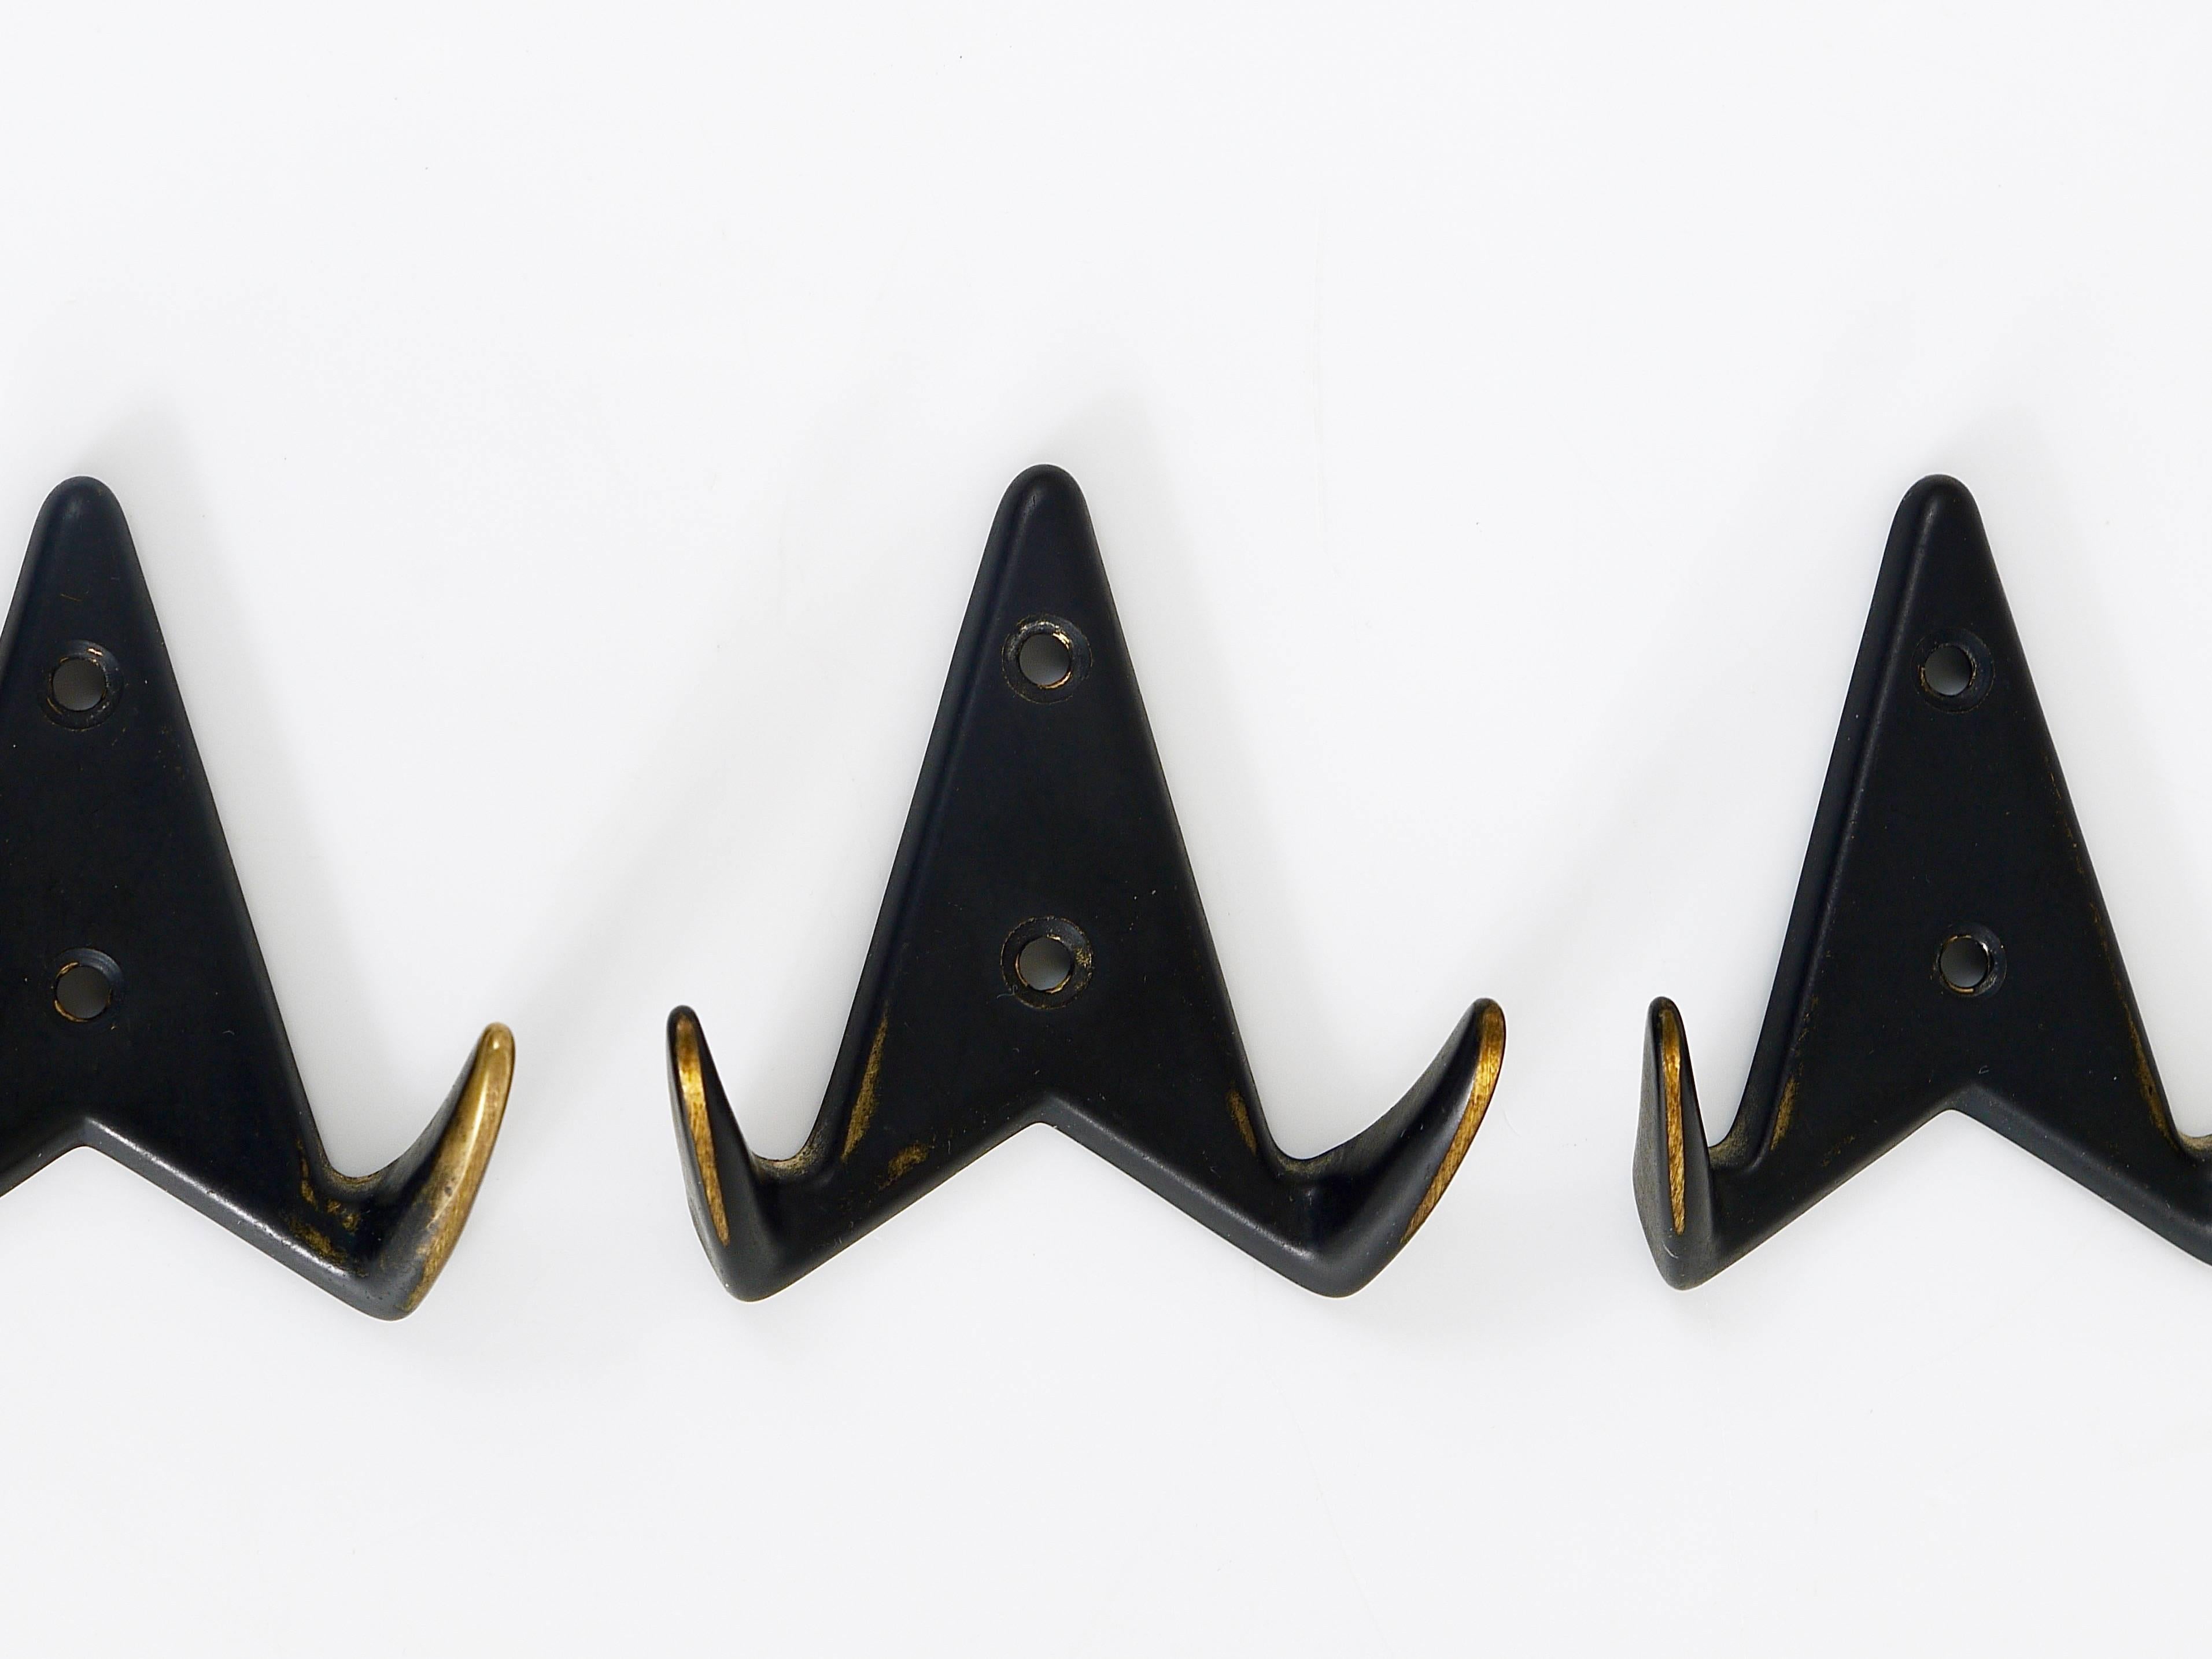 A set of three beautiful modernist wall hooks from the 1950s, made of black-finished brass. Made in Austria. To be used as coat hooks, but also for towels in the bathroom or in the kitchen. In excellent condition.